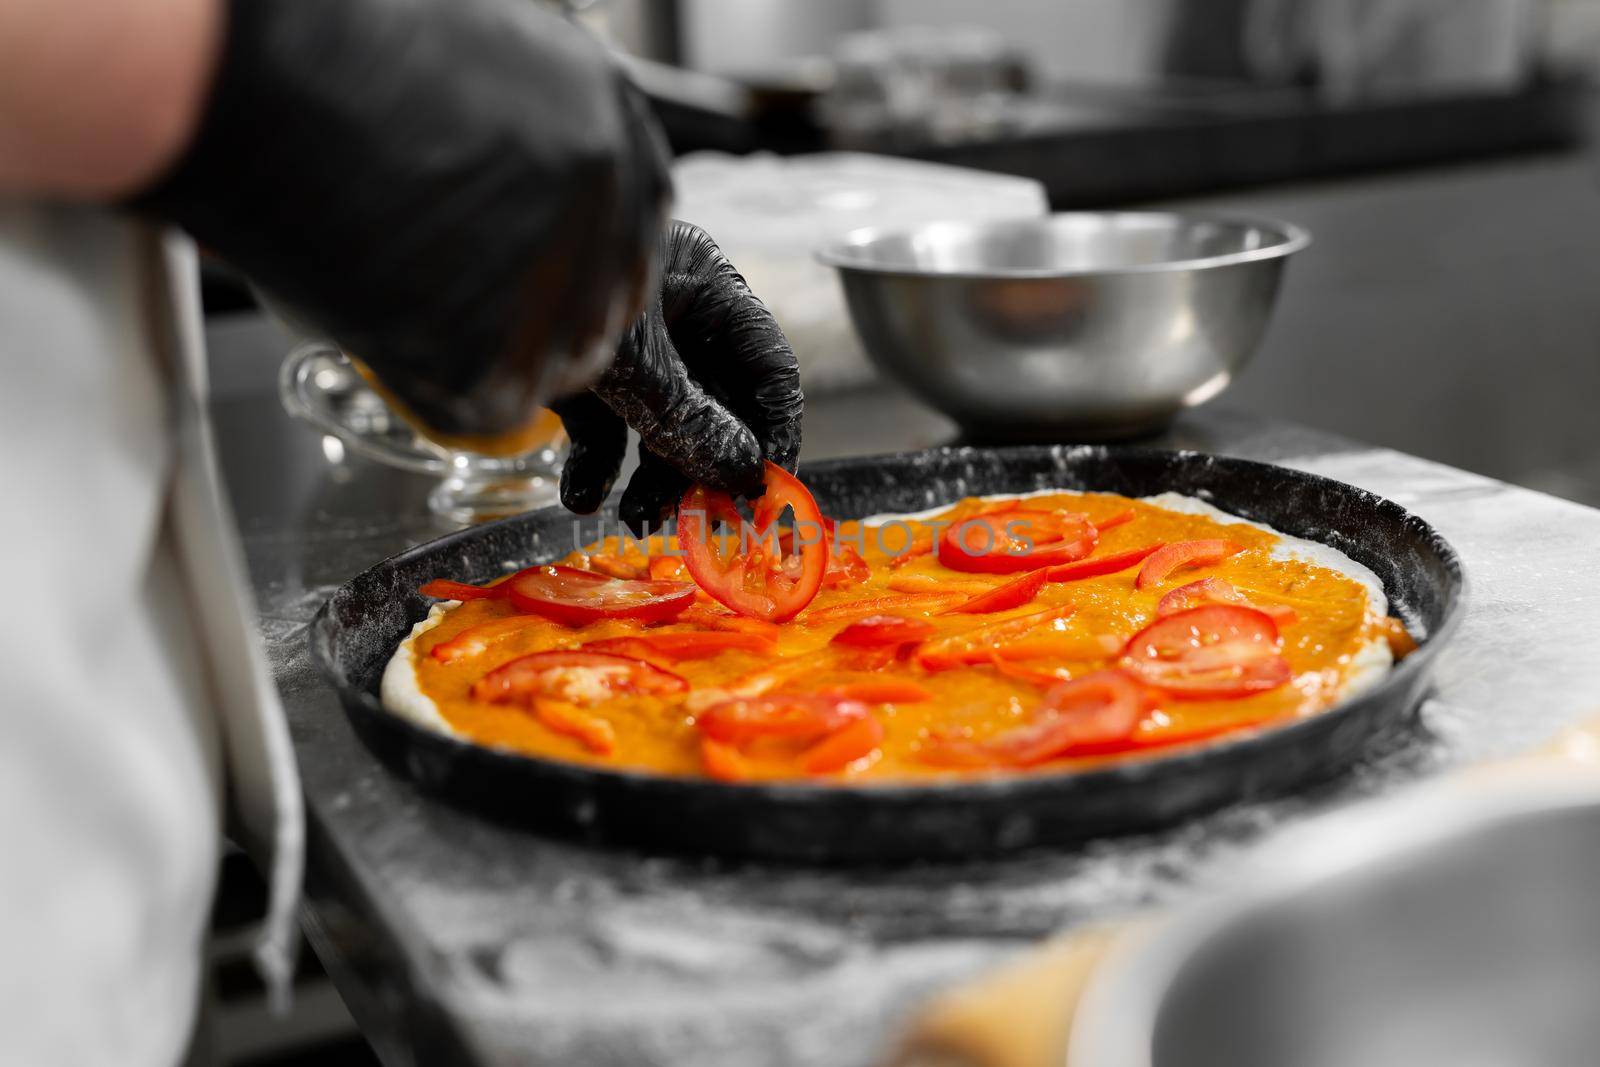 Cooking pizza. Close-up of the chef's hand spreading slices of tomato on the dough.